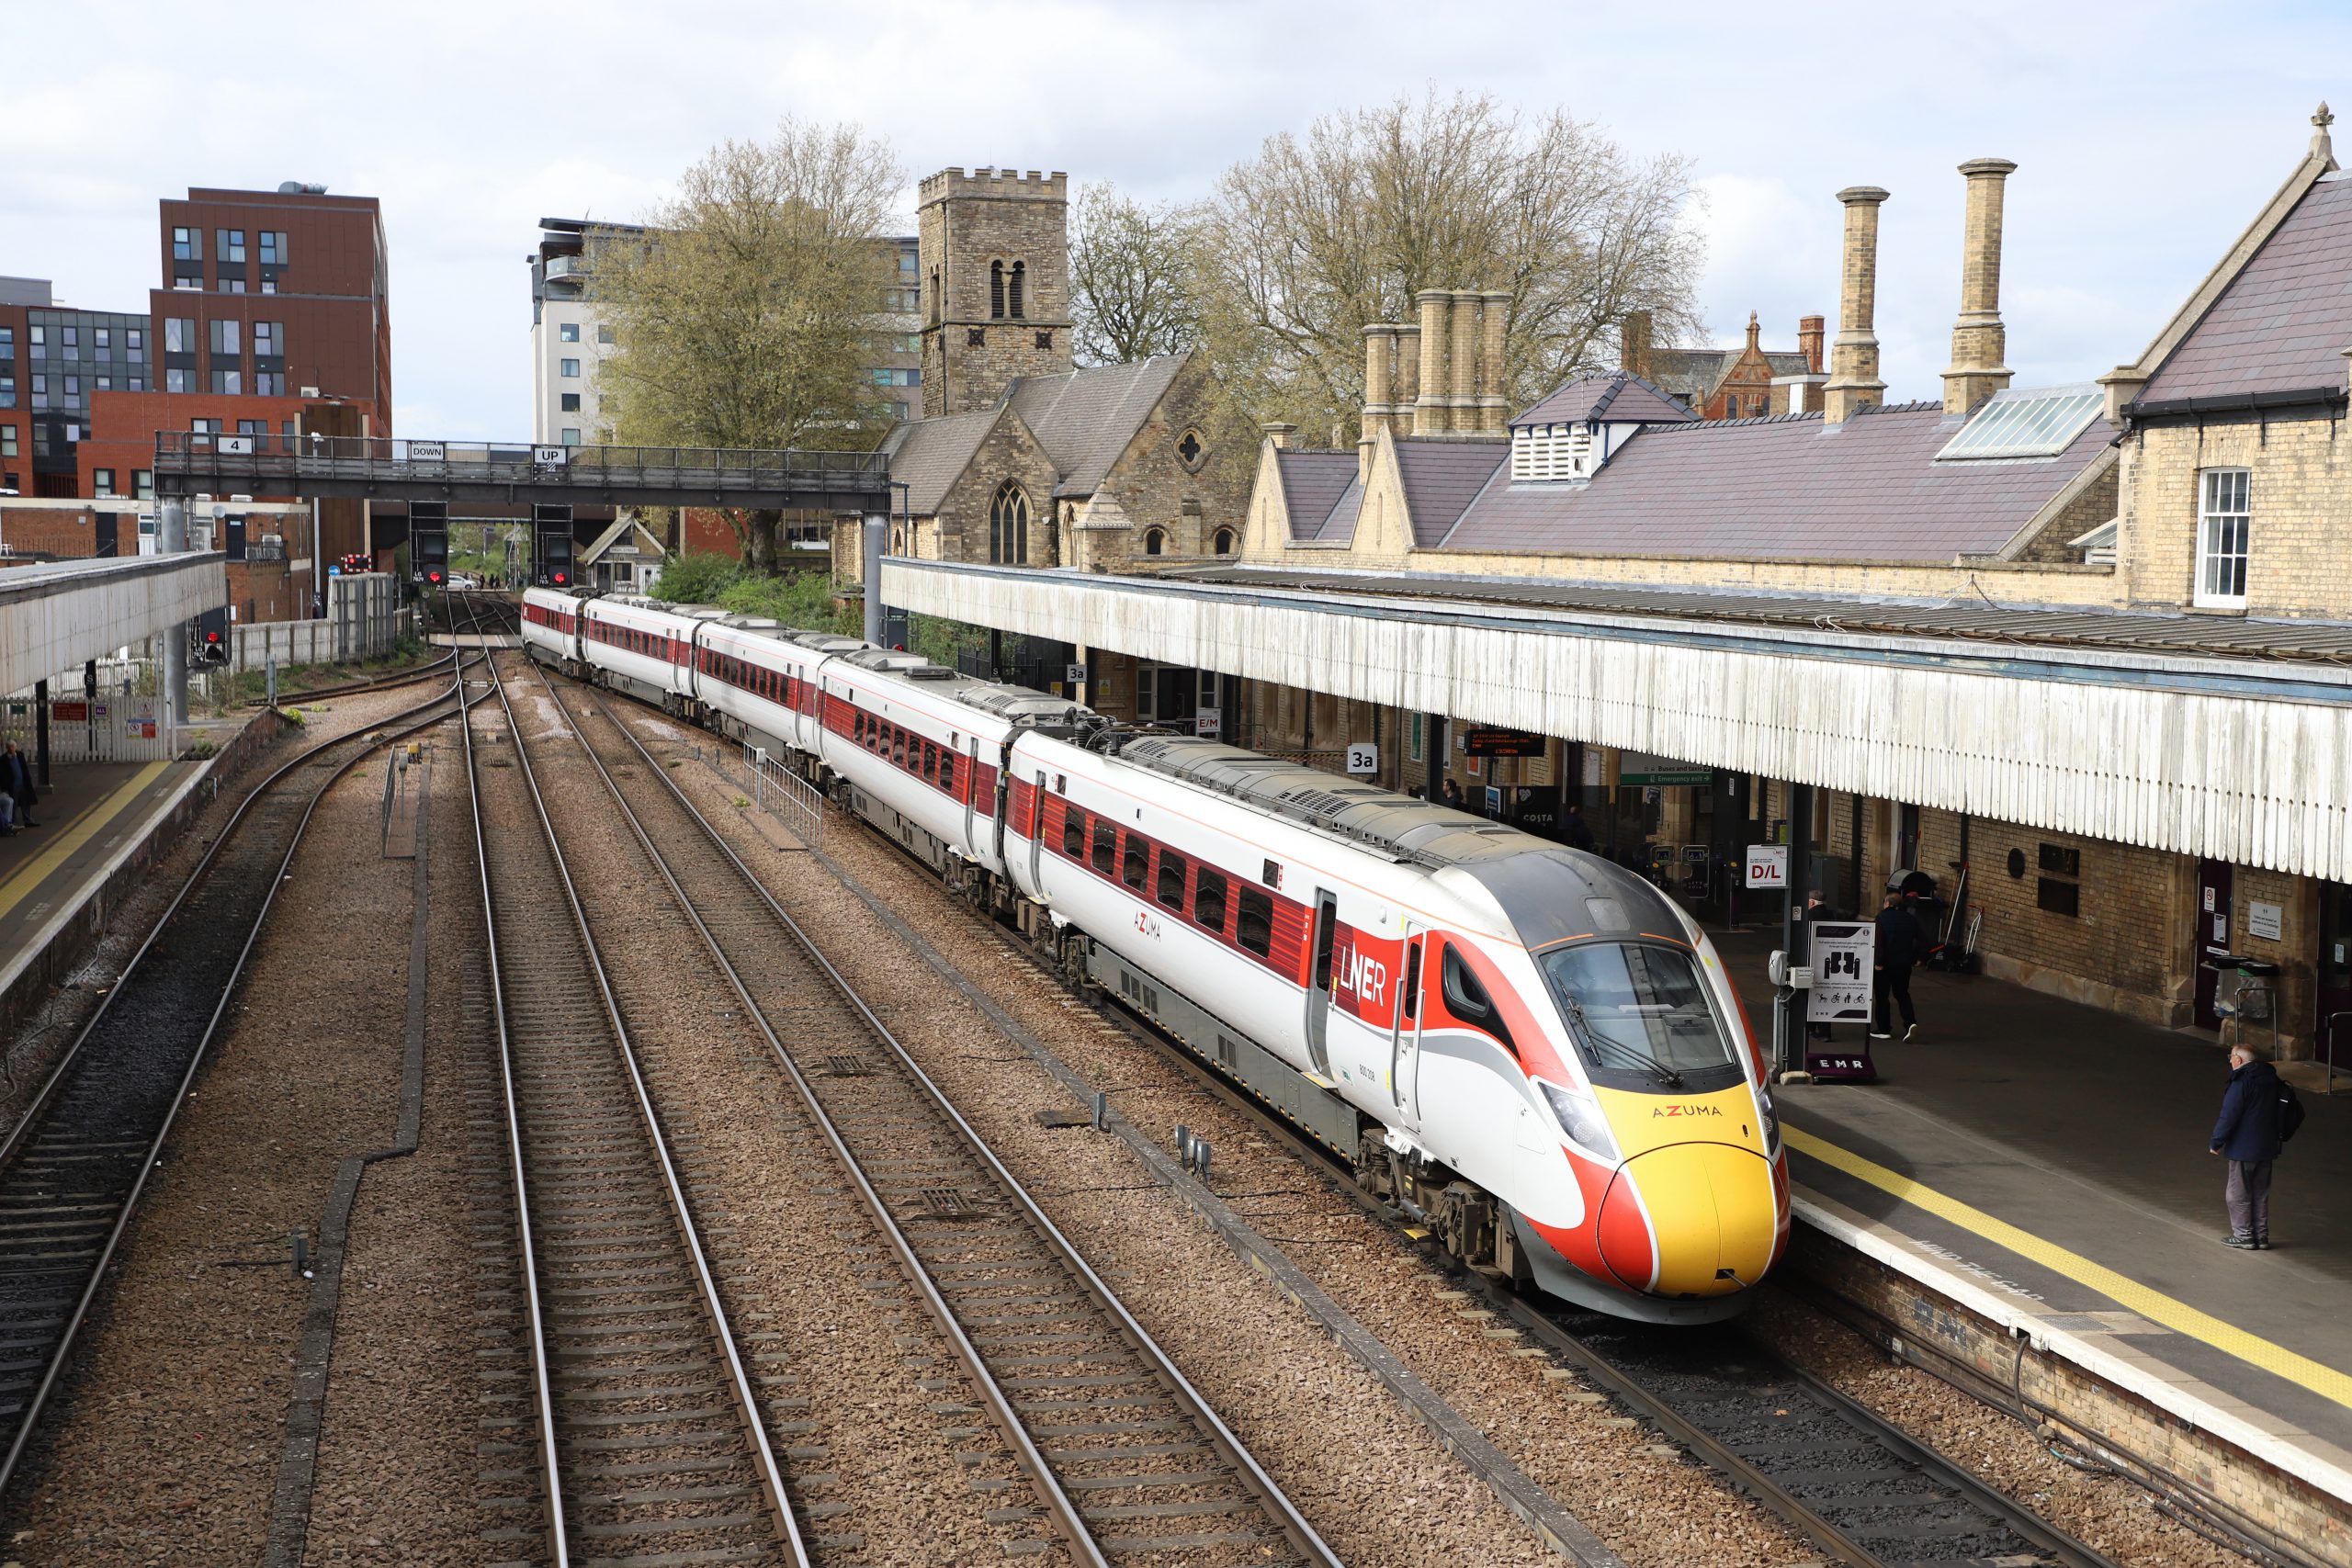 Azuma bi-mode unit 800208 terminating at Lincoln Central with the 12:06 service from Kings Cross : Image credit - Brian Roberts